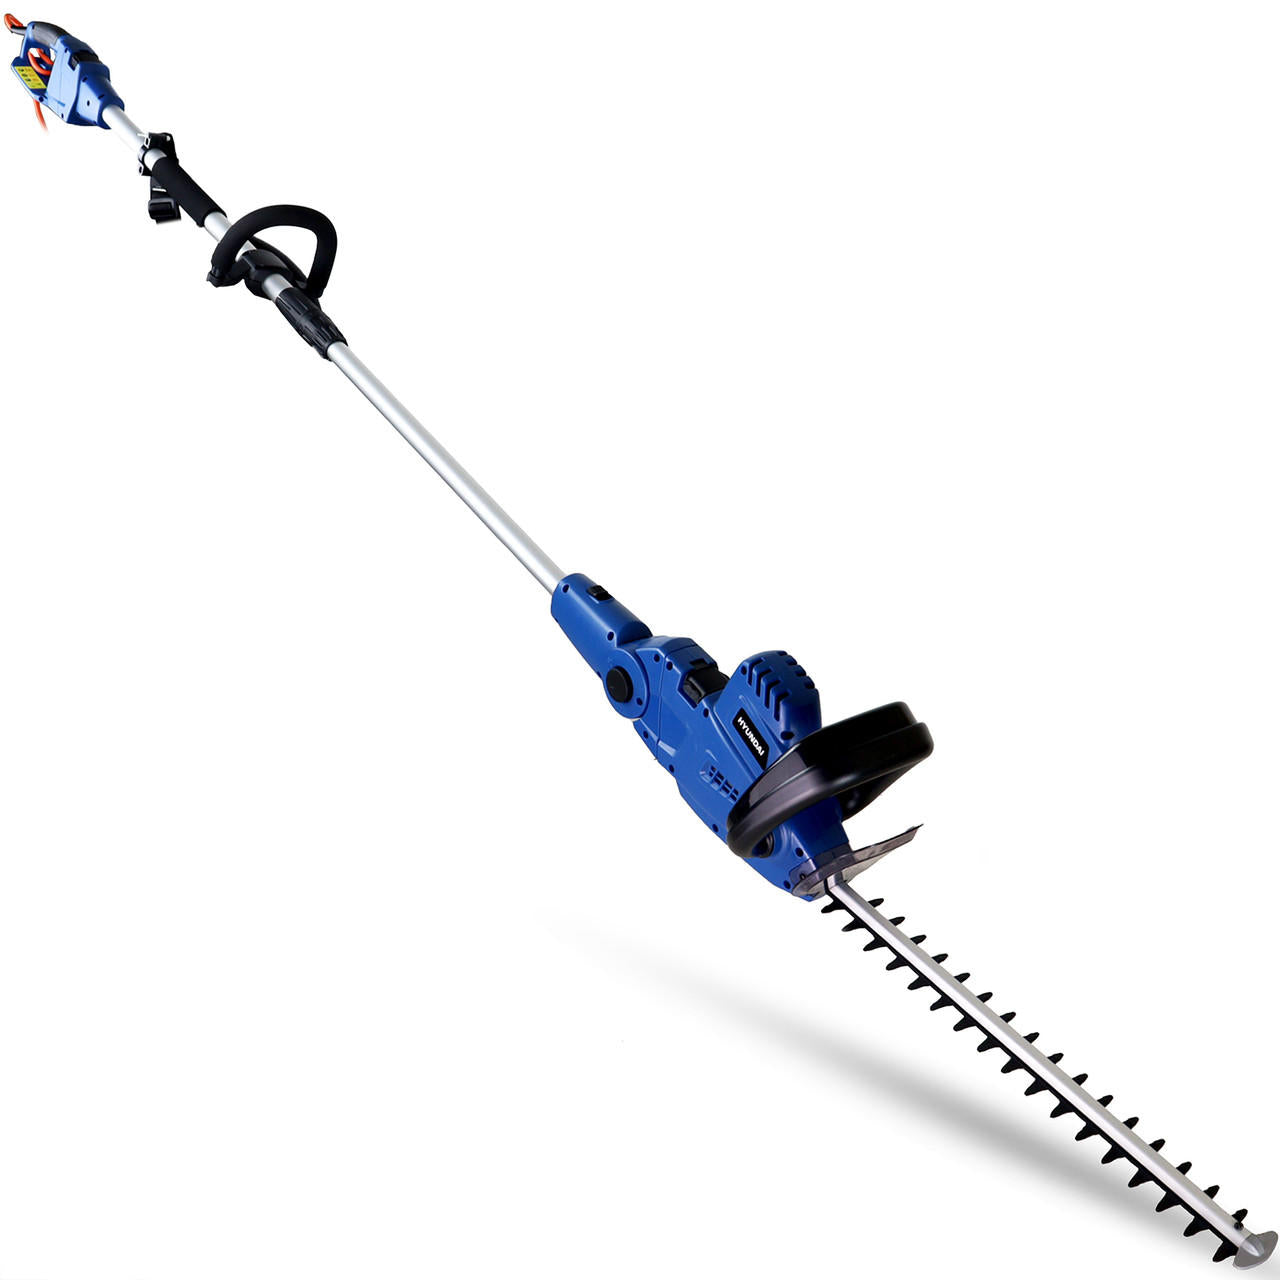 Hyundai HYP2HT550E 2-in-1 Extendable Electric Hedge Trimmer - 550W